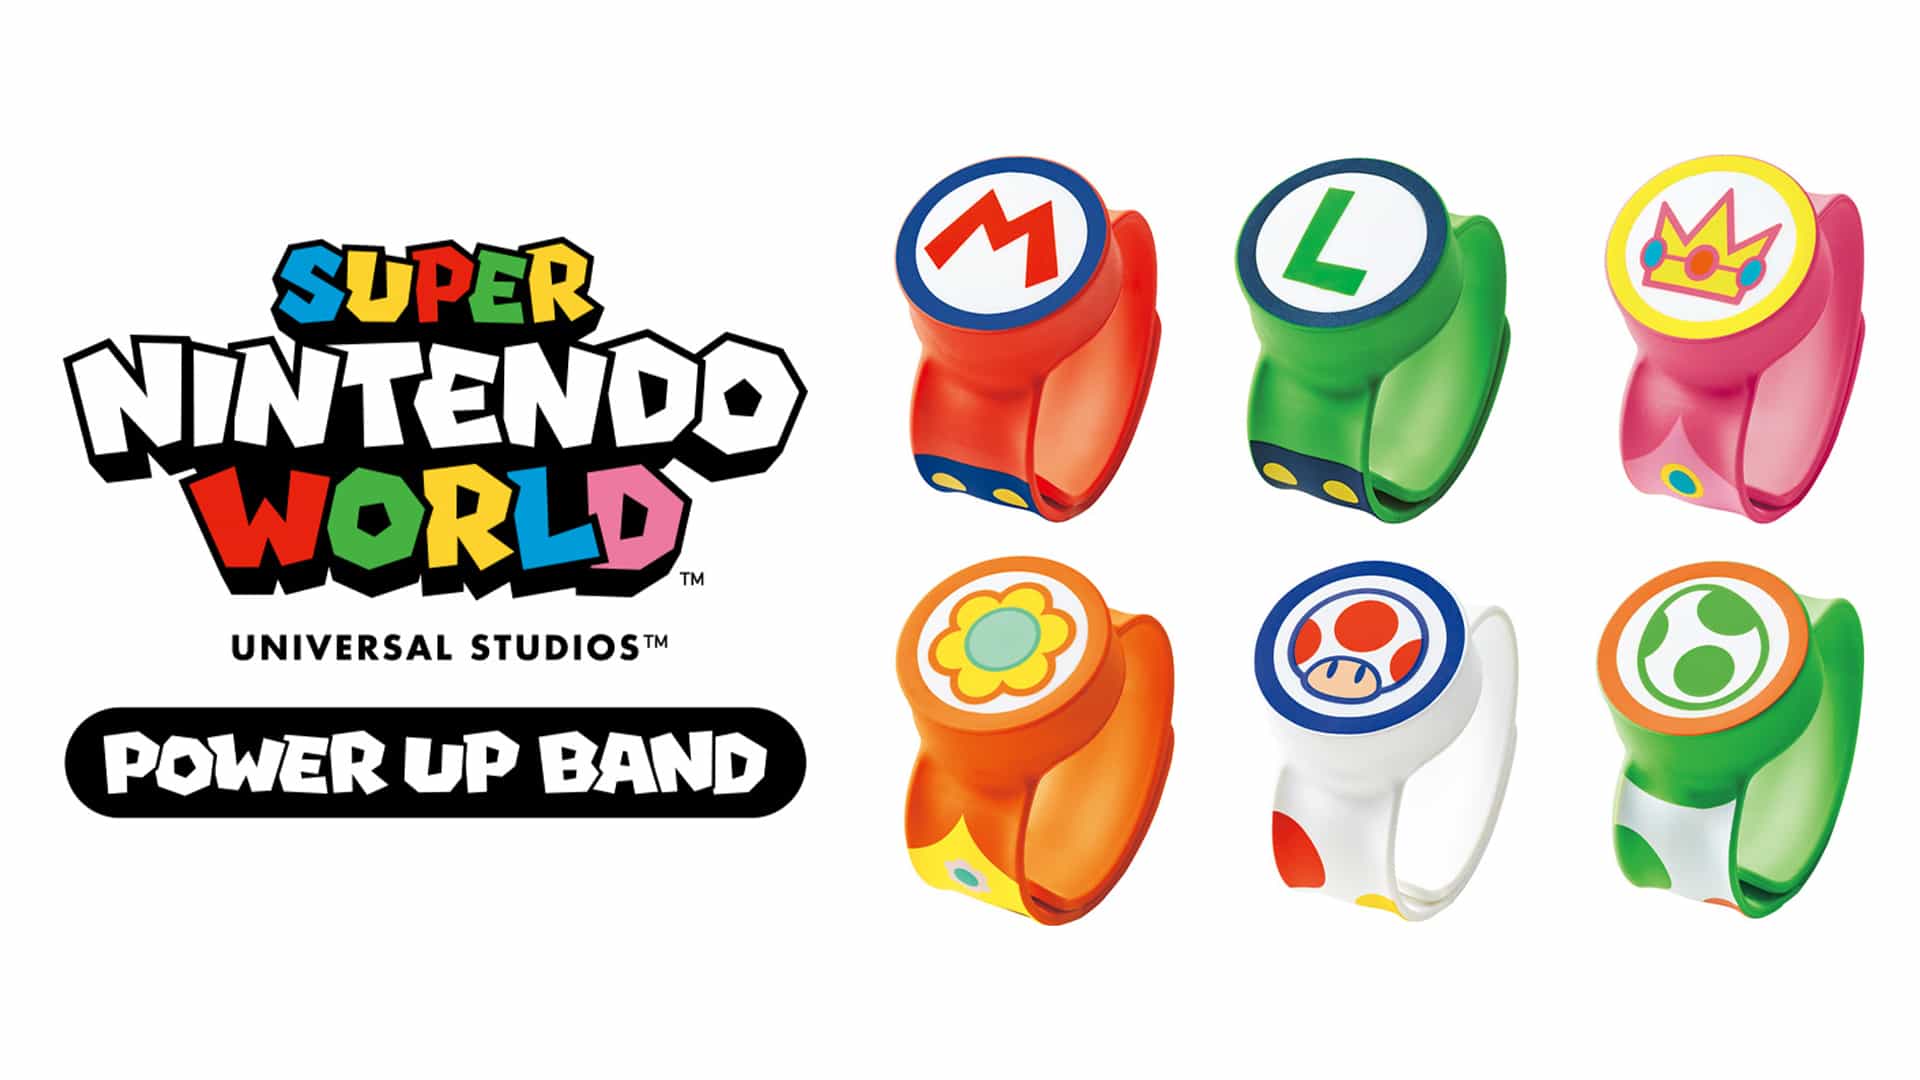 Super Nintendo World’s Power-Up Band amiibo used in detail